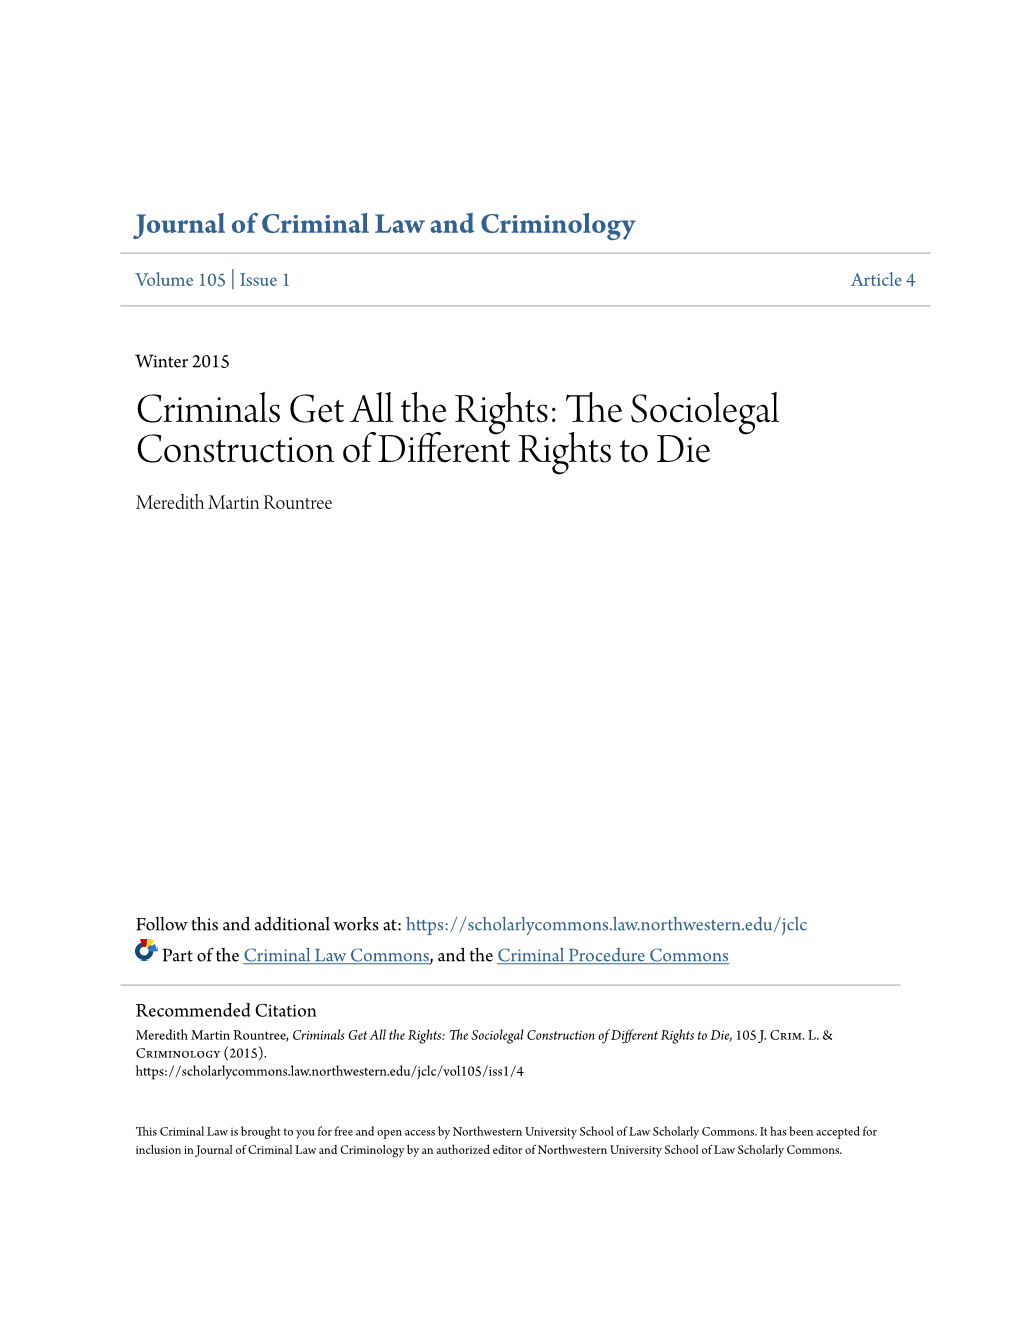 Criminals Get All the Rights: the Sociolegal Construction of Different Rights to Die, 105 J